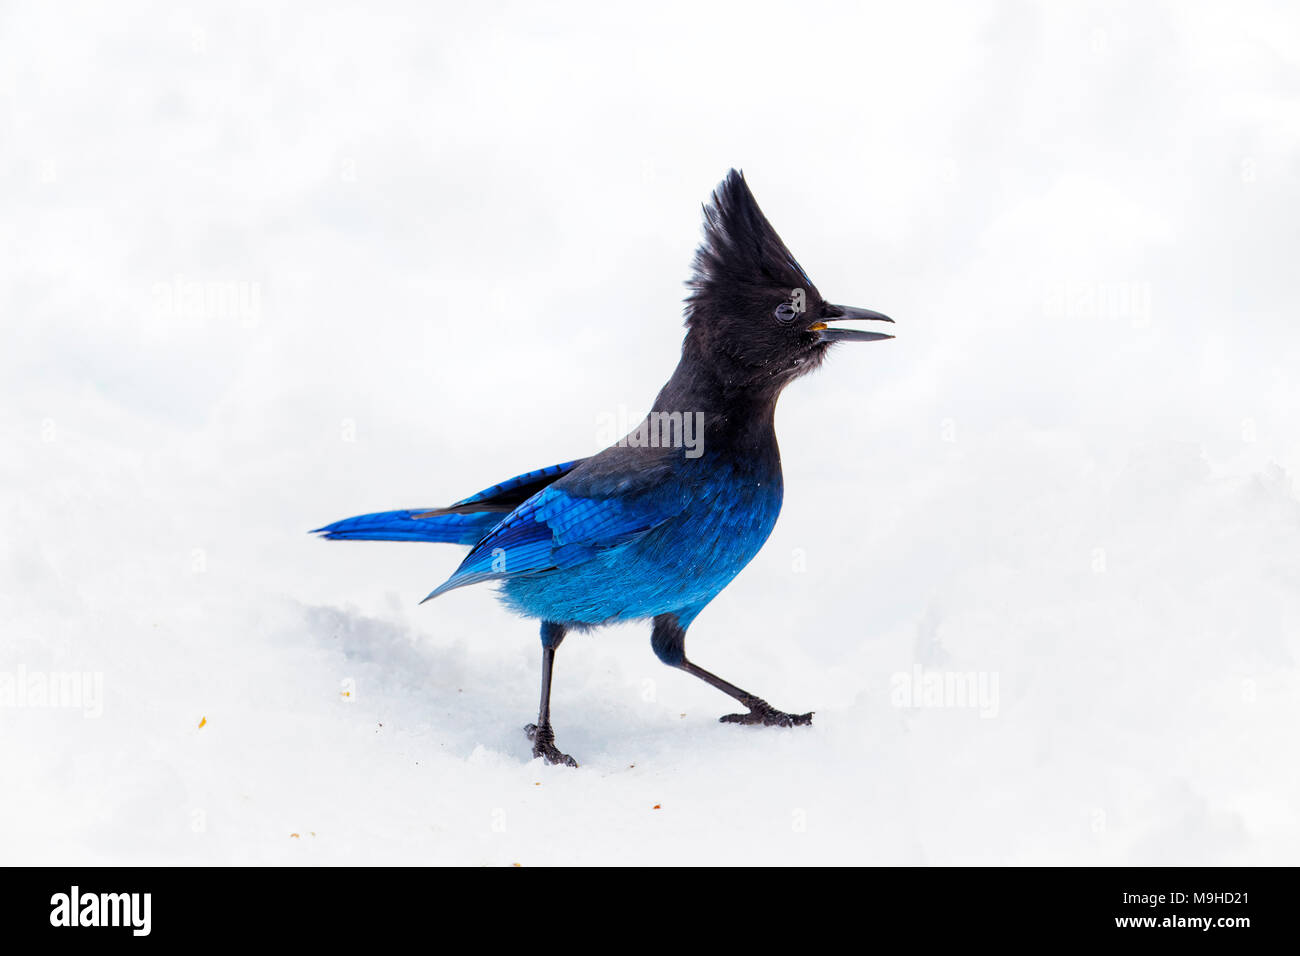 43,160.09772 close-up of a Steller’s Jay bird standing in winter snow, crested head gorgeous beautiful blue and black Stock Photo